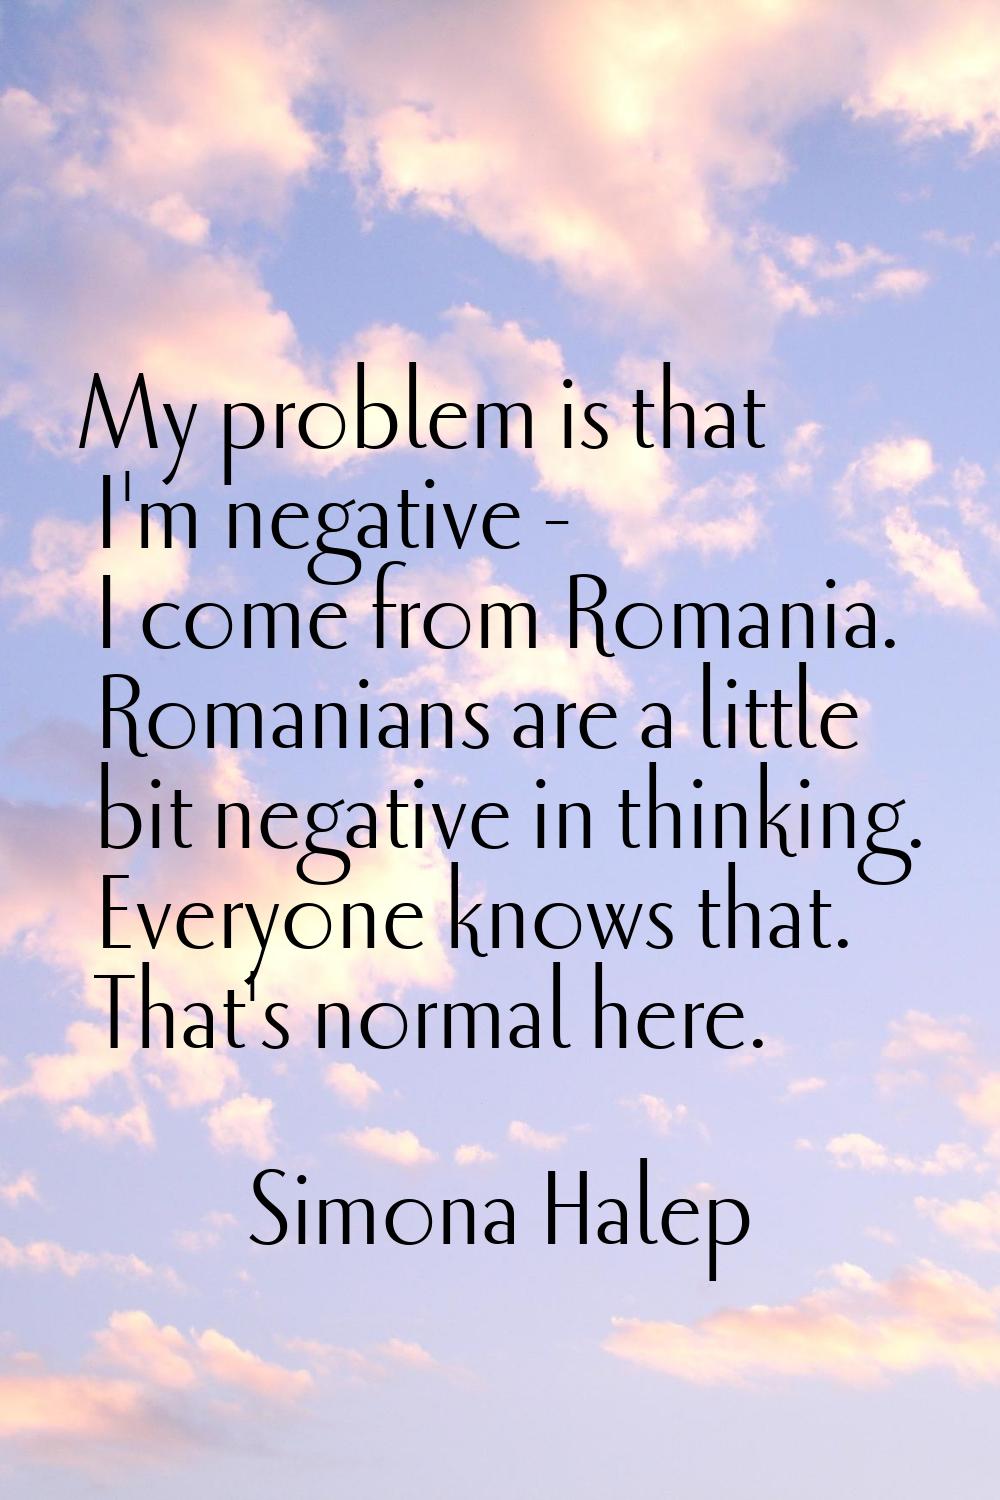 My problem is that I'm negative - I come from Romania. Romanians are a little bit negative in think